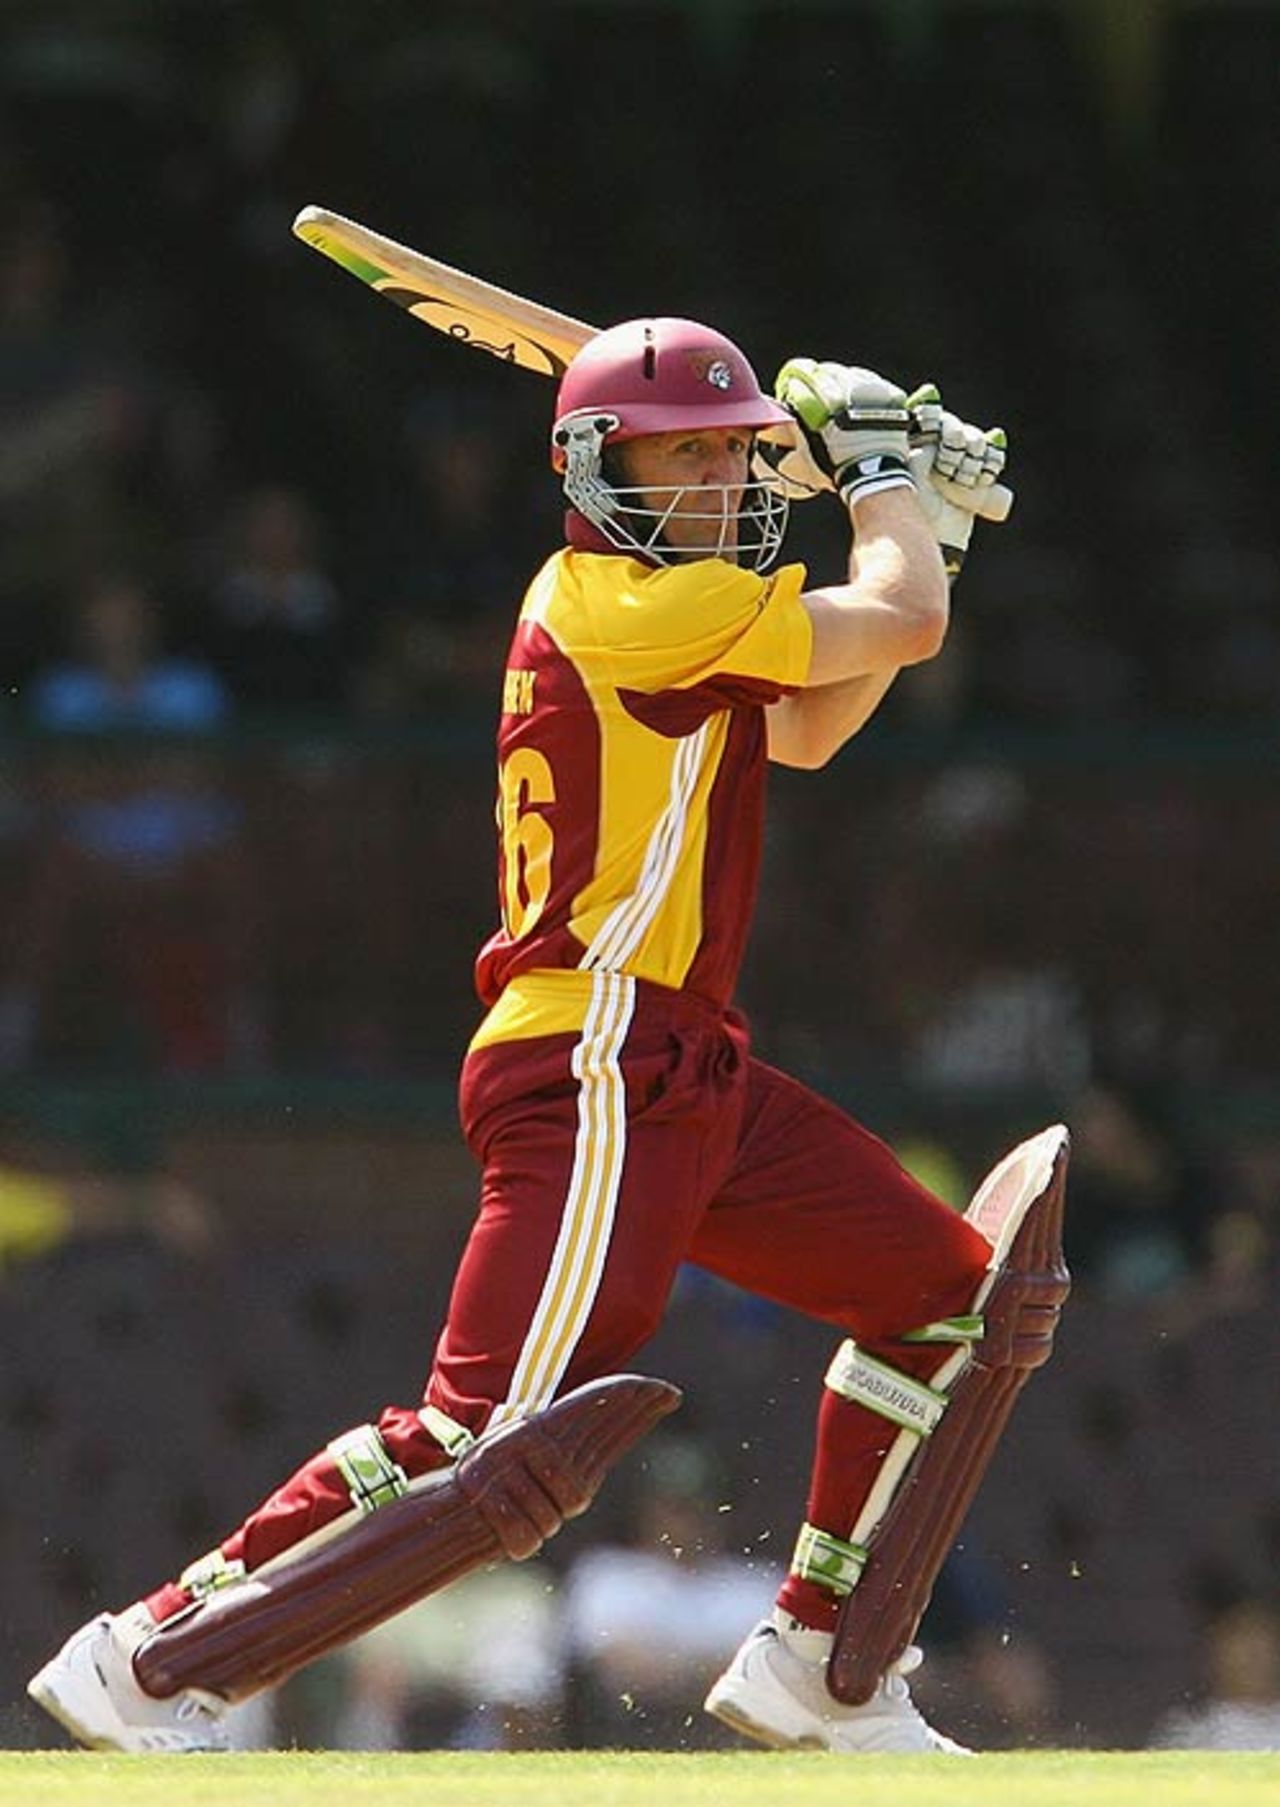 Clinton Perren cuts through the off side during his innings of 69, New South Wales v Queensland, FR Cup, Sydney, December 6, 2006